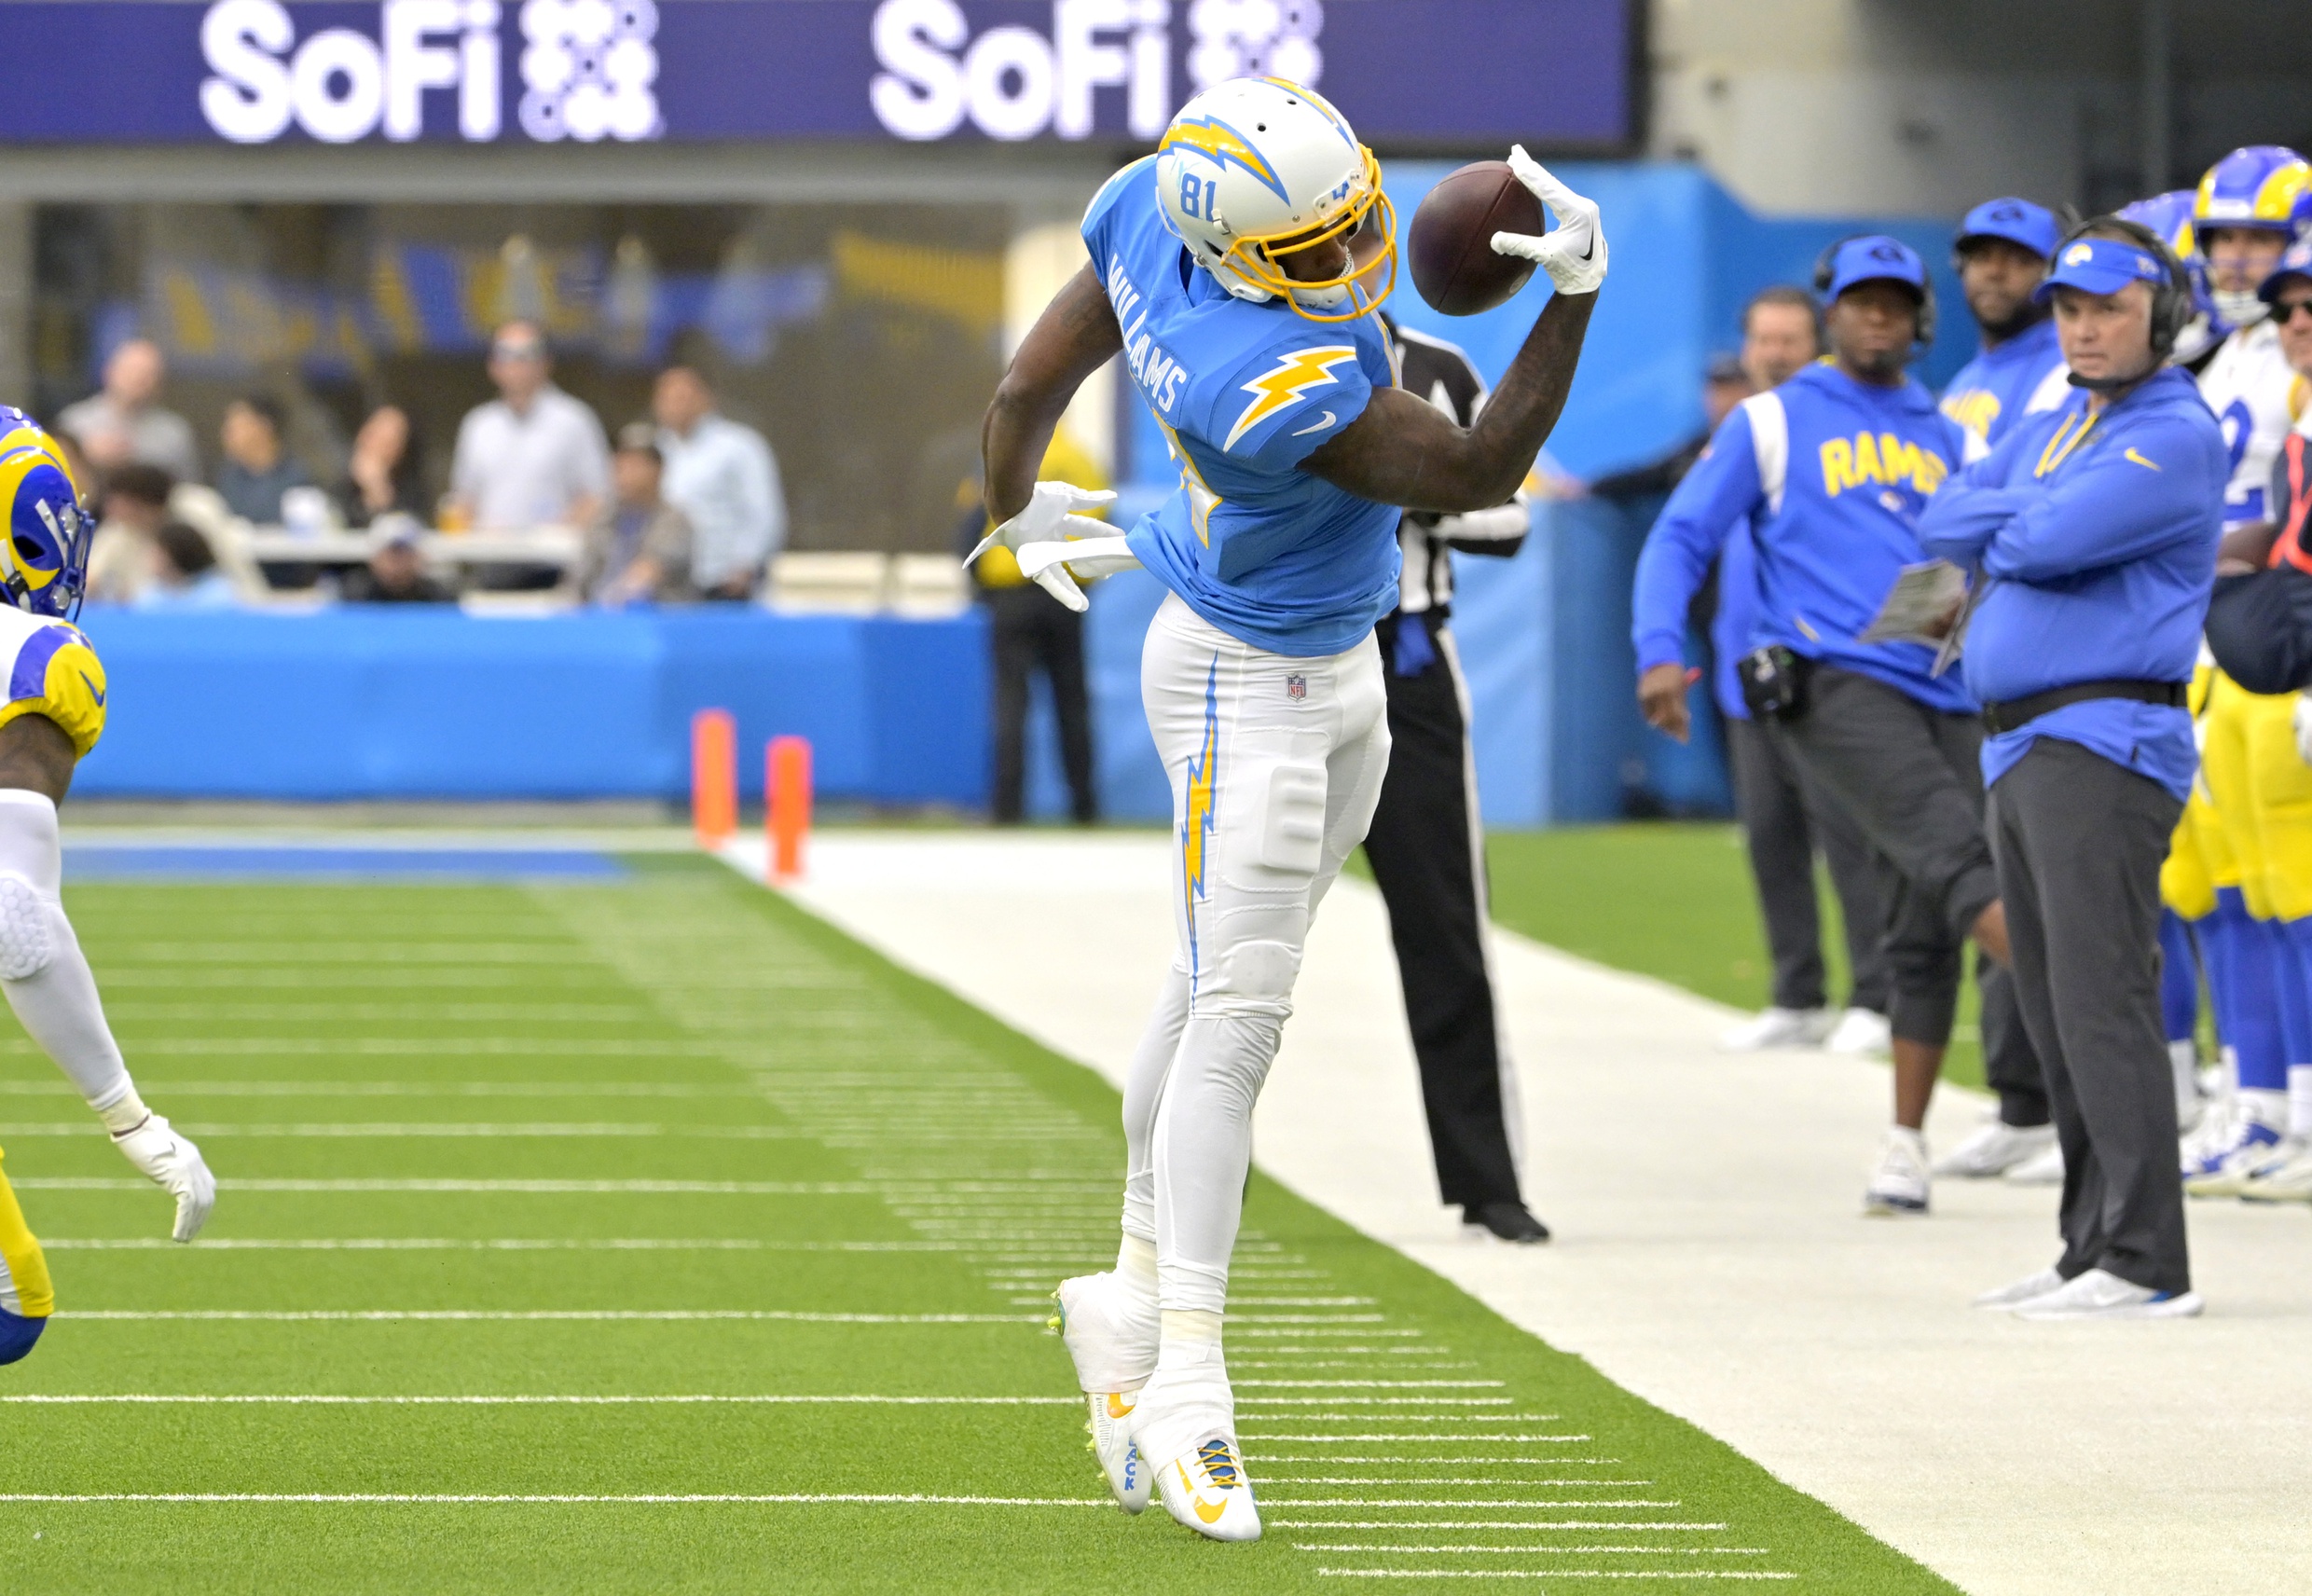 Chargers News: Mike Williams named fantasy WR to start in Week 1